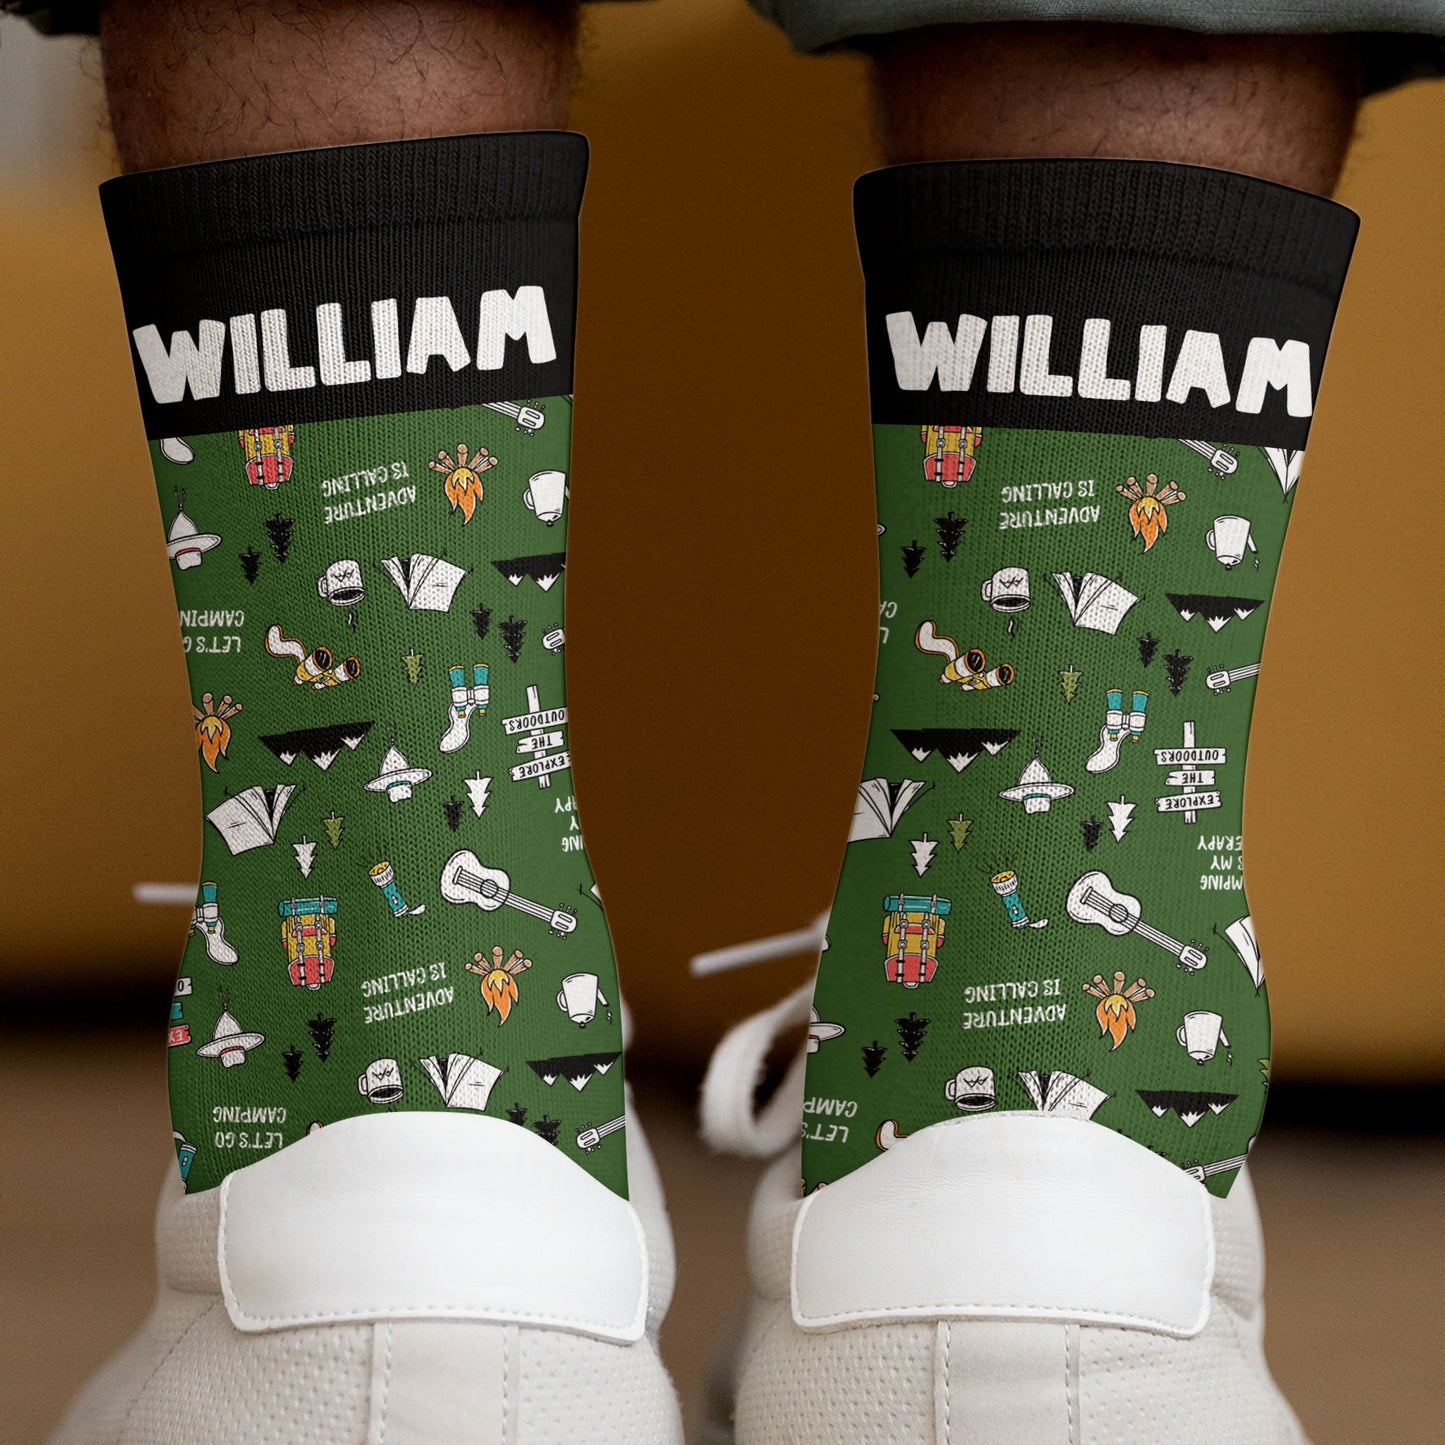 I'd Rather Have Beer With Darryl - Personalized Crew Socks